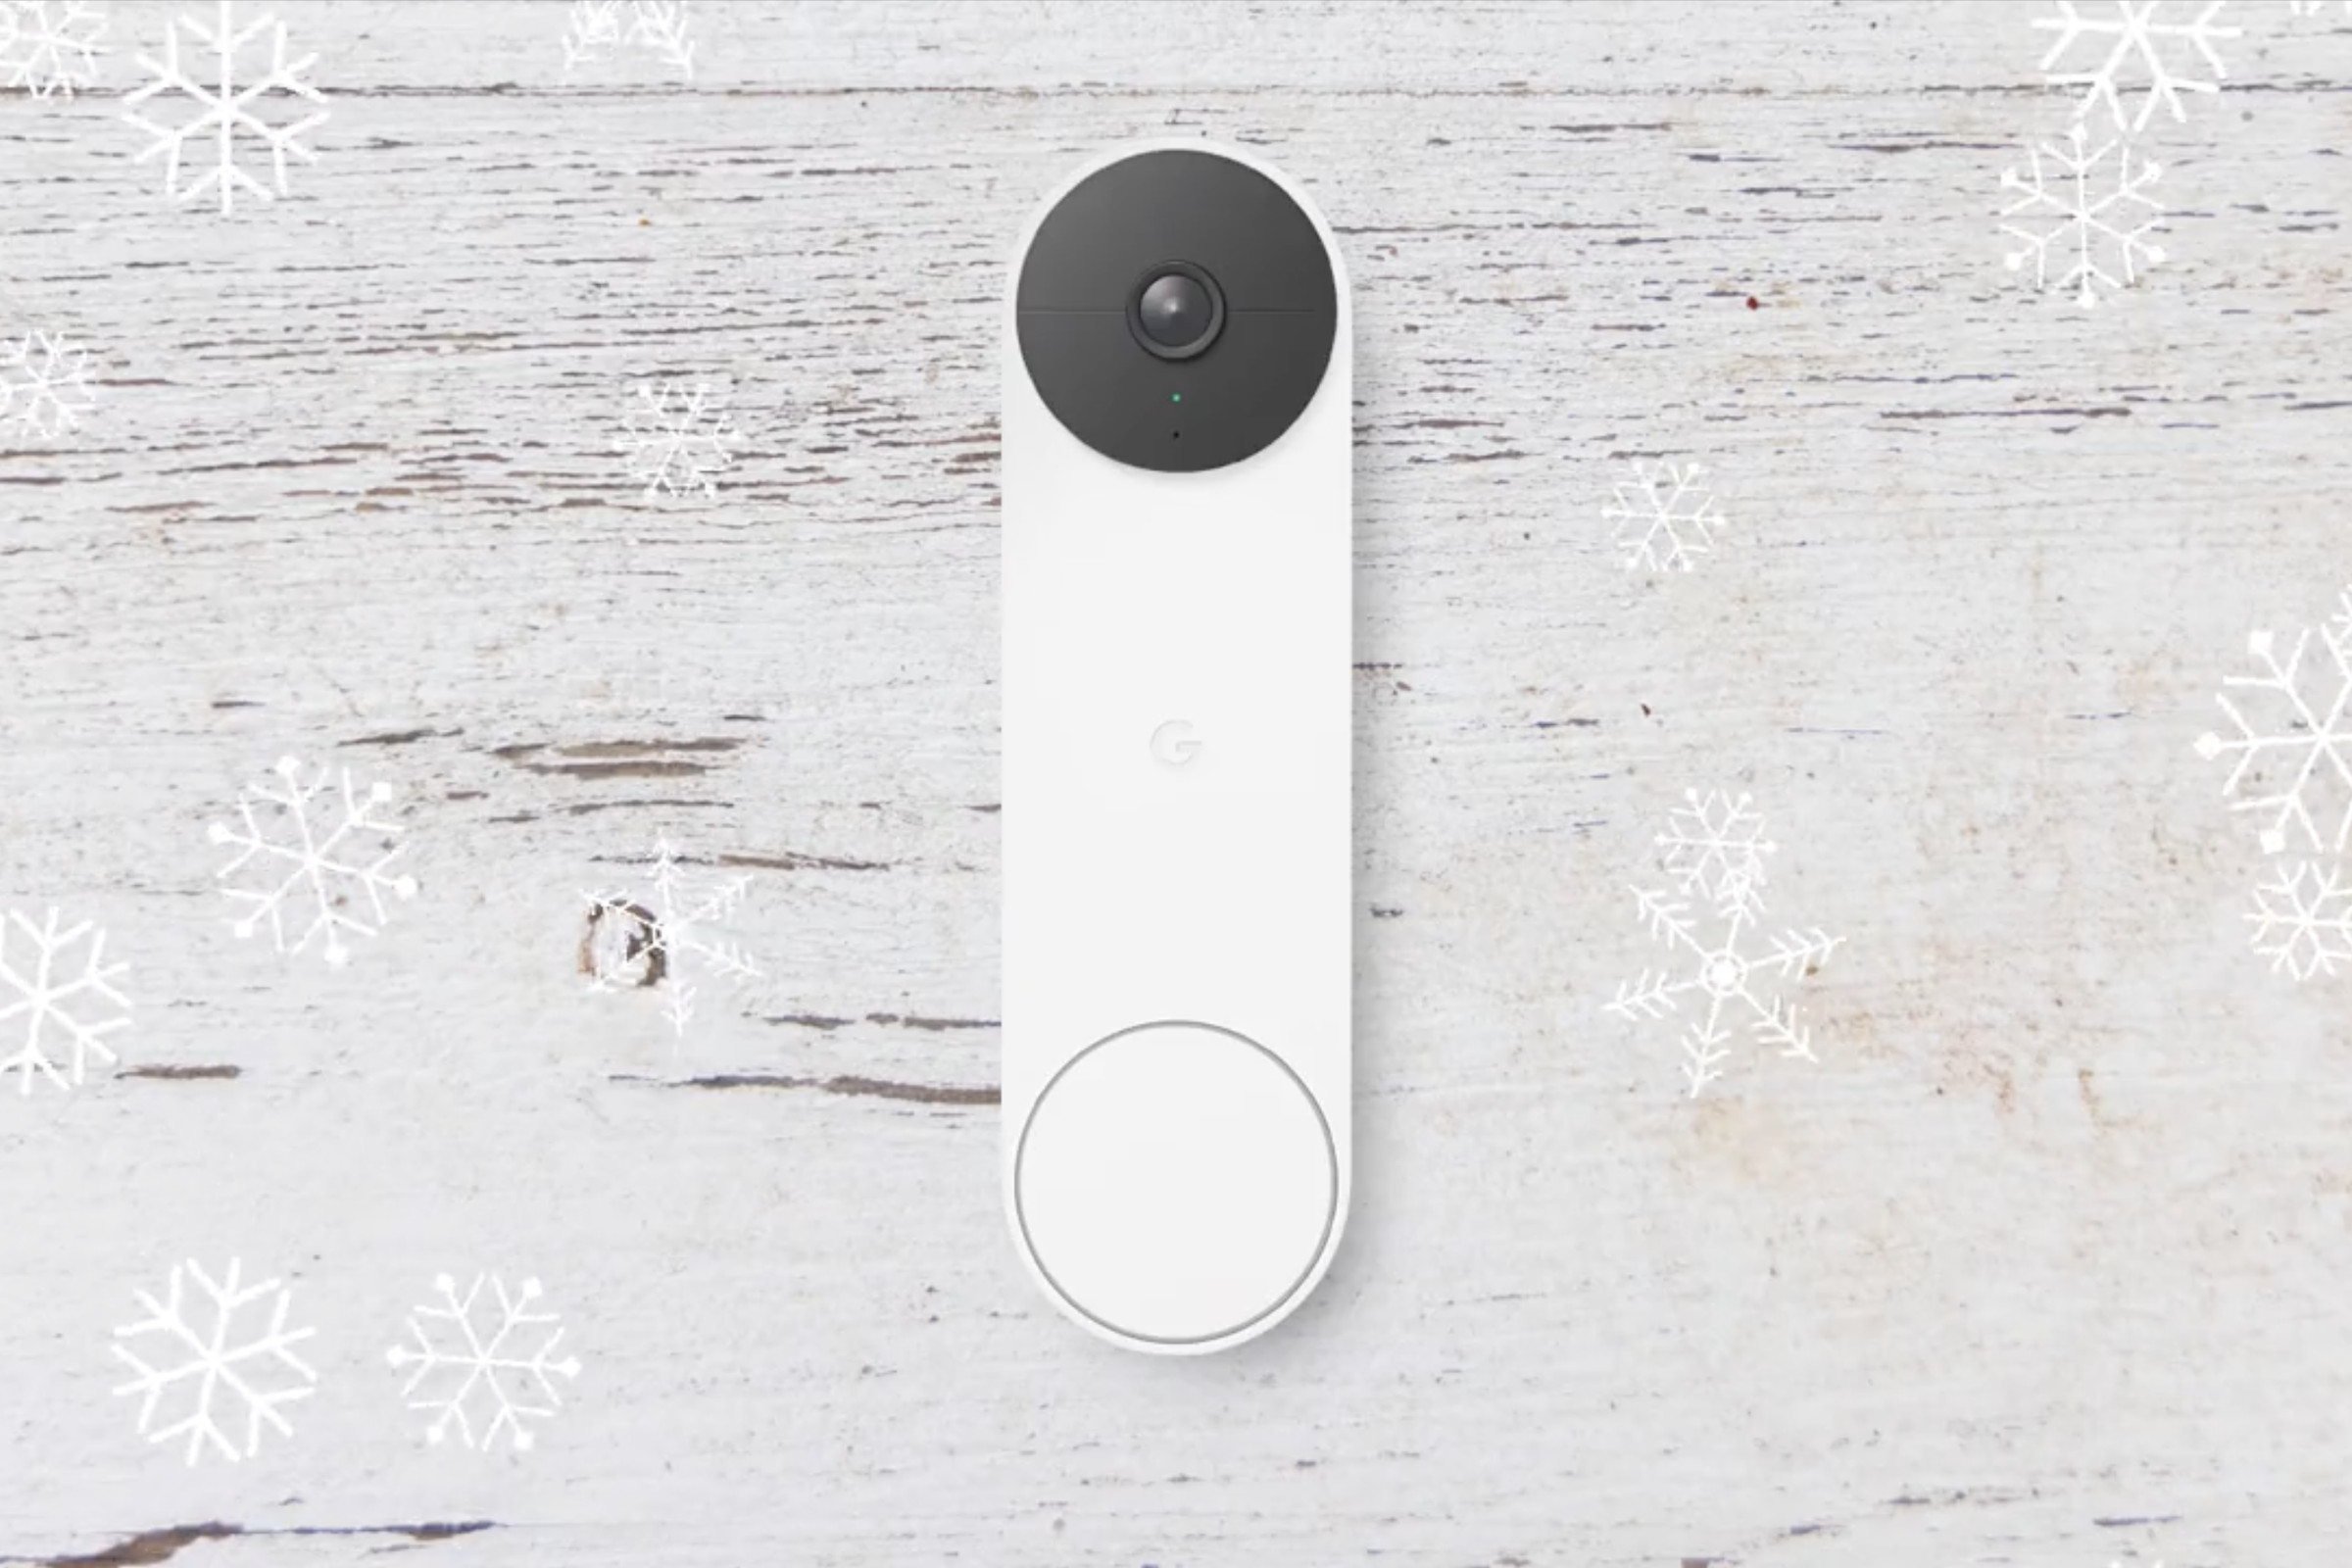 Google Nest doorbell on a gray wood plank. It has a camera lens on the top and a circle button on the bottom. Snowflake designs around the background